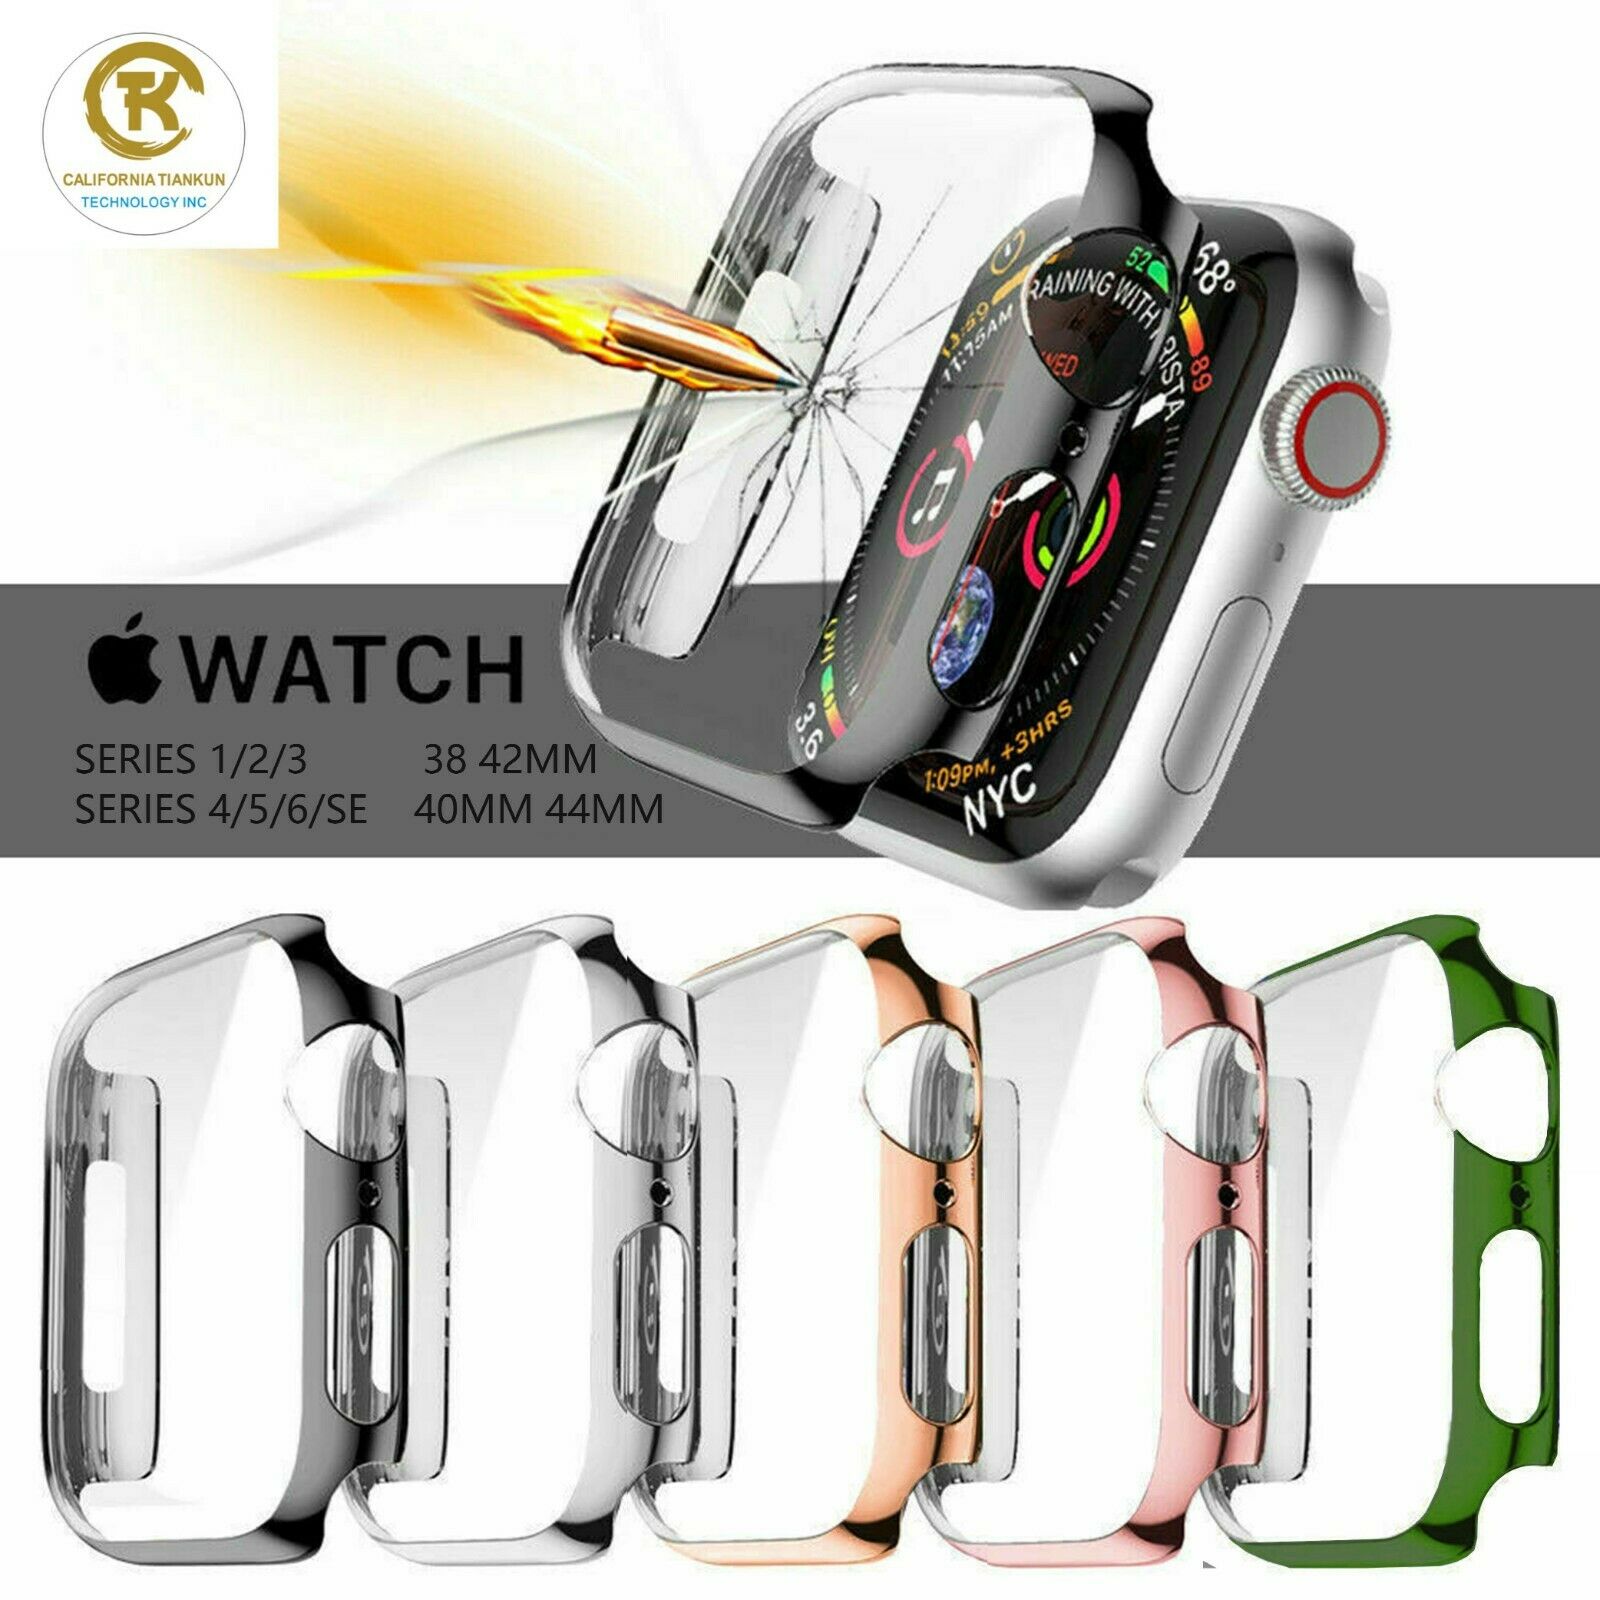 2 Pack For Apple Watch Series 4/5/6/SE 40/44mm Screen Protector Case Full Cover